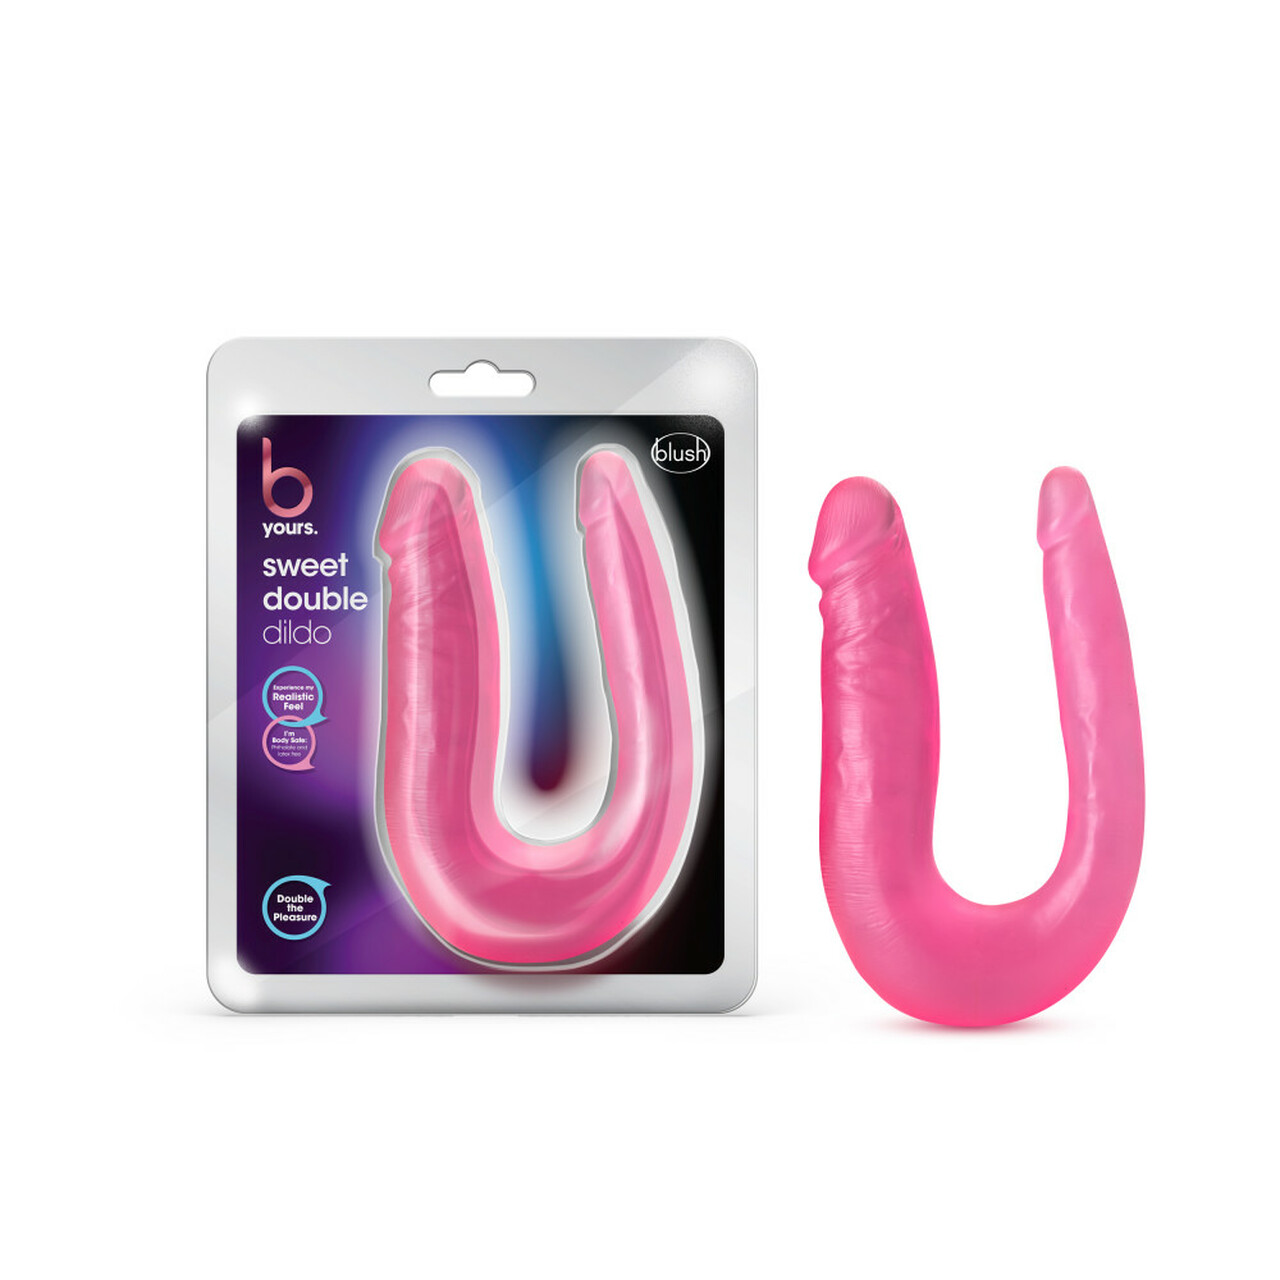 B YOURS SWEET DOUBLE DILDO PINK 